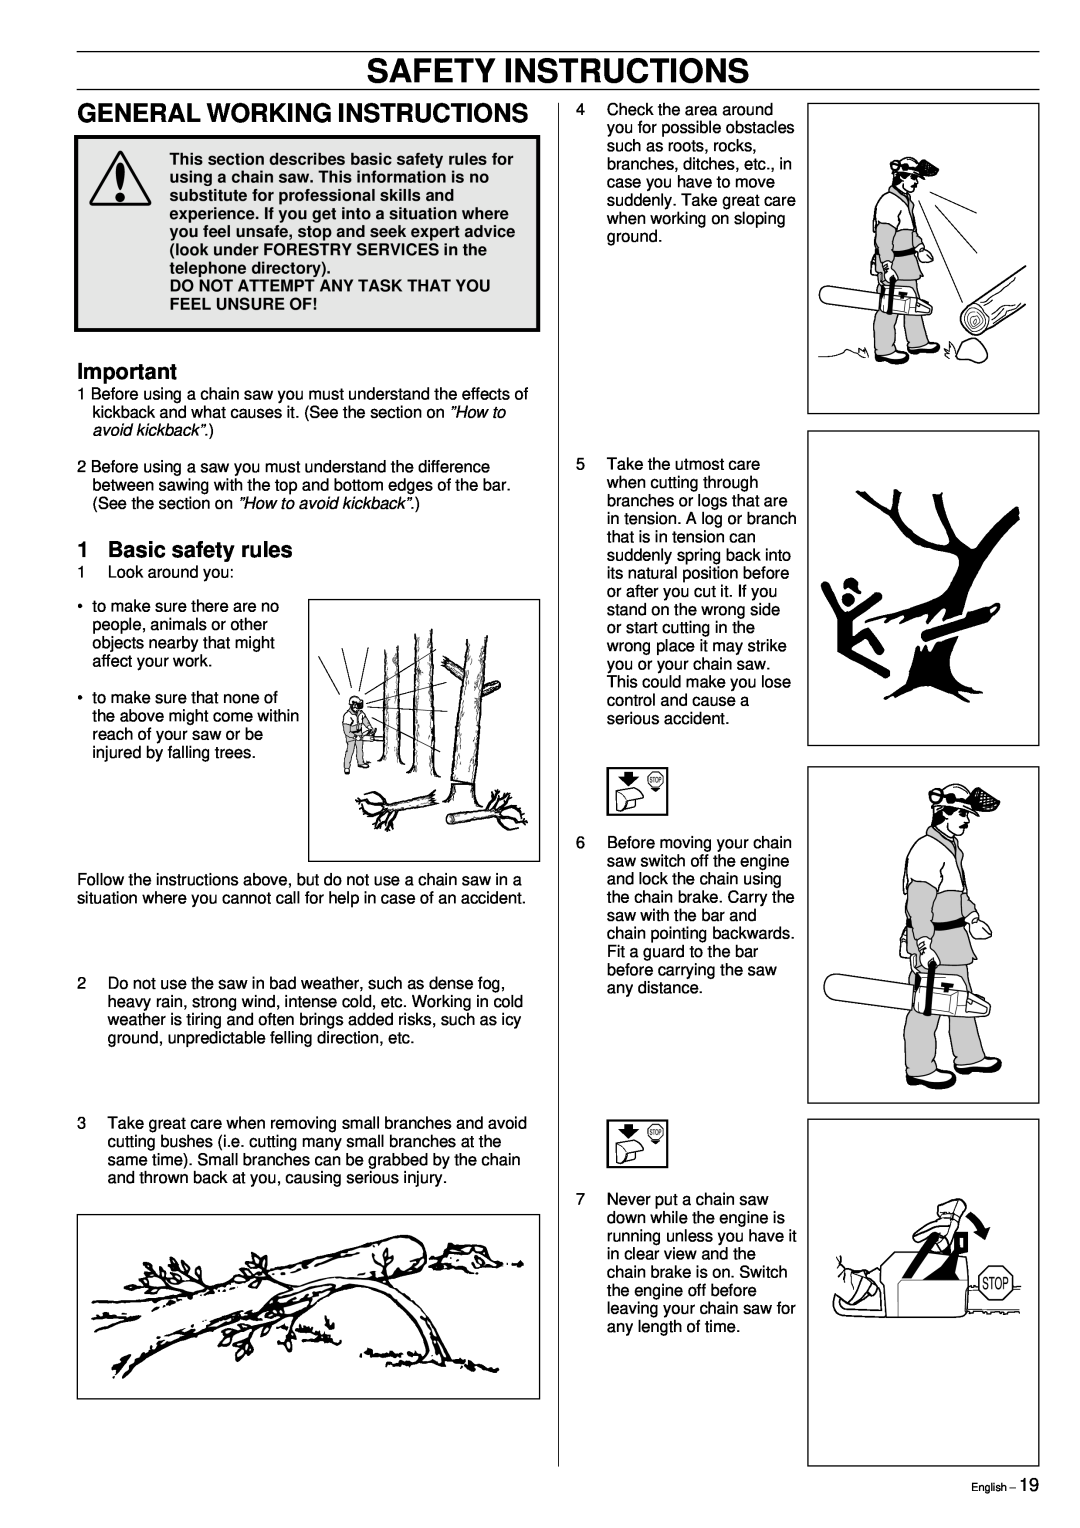 Jonsered 2149 manual General Working Instructions, Basic safety rules, Safety Instructions 